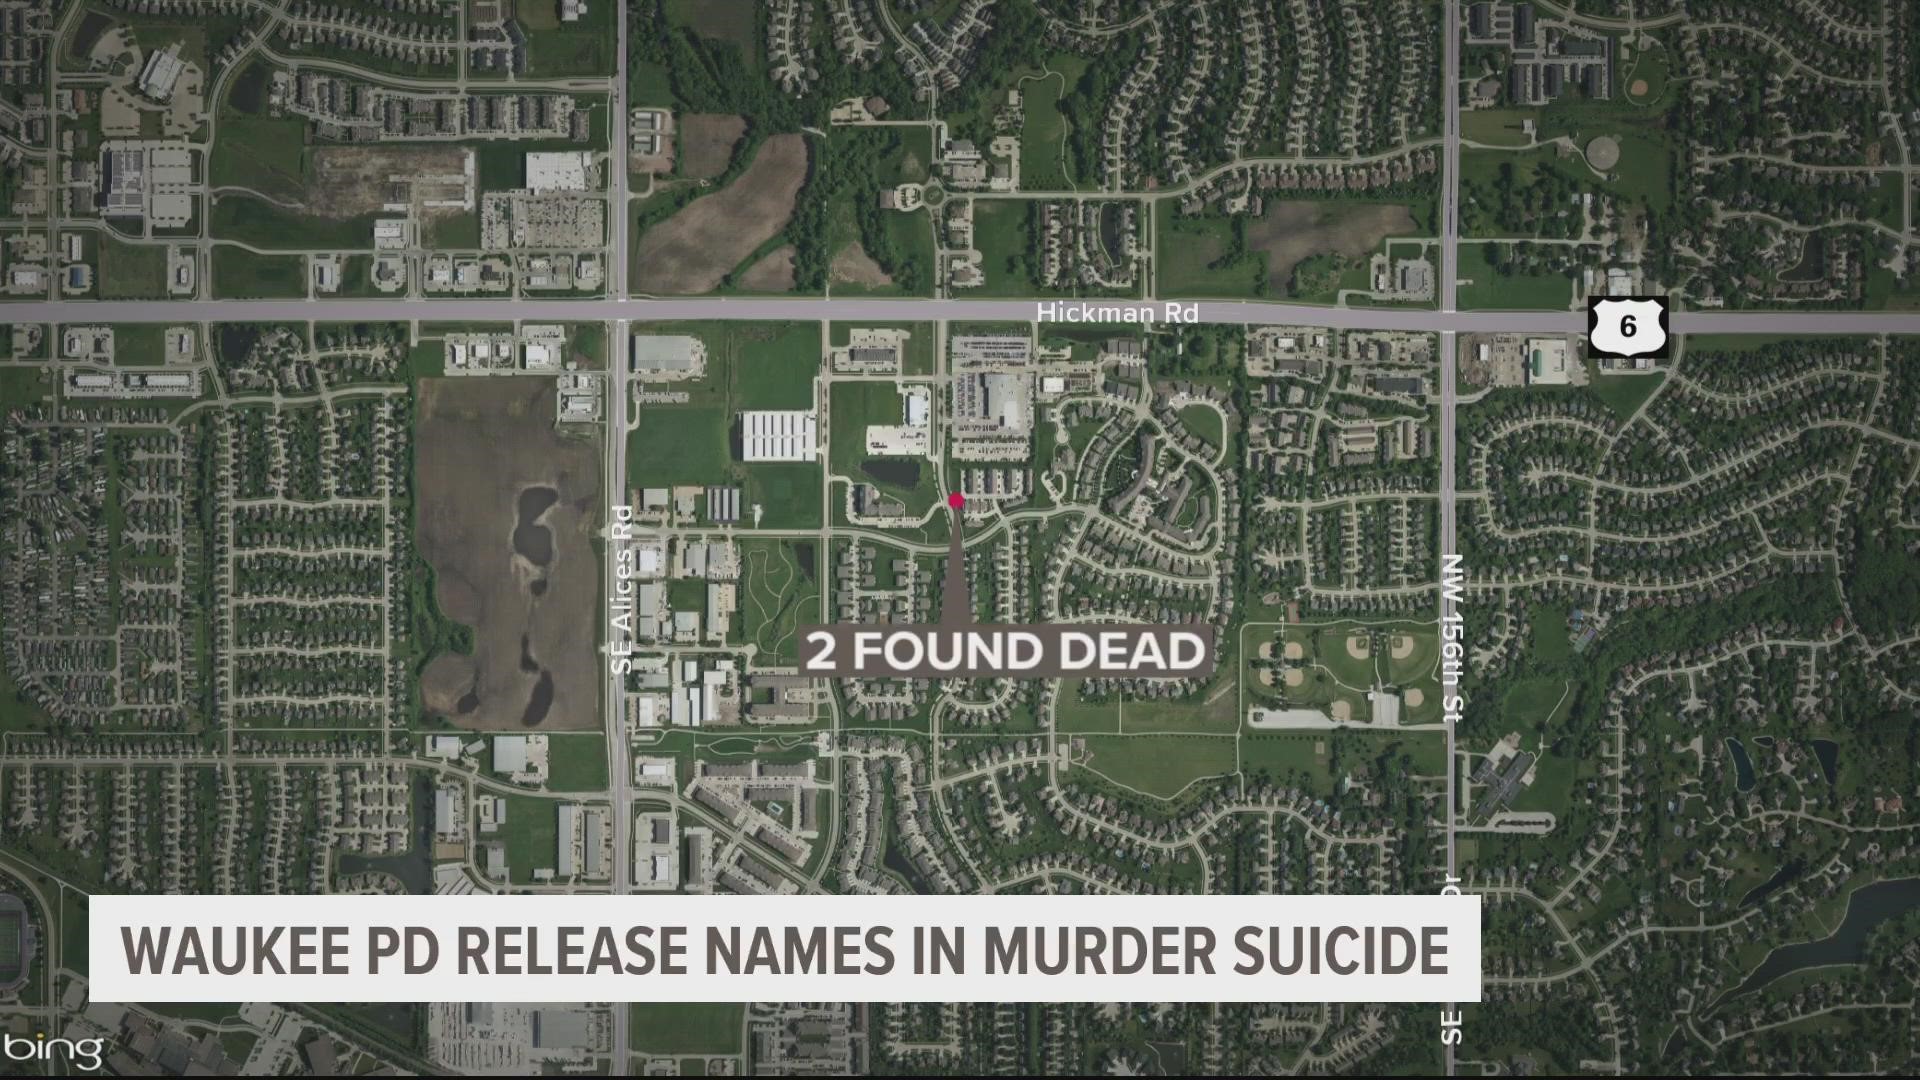 Police discovered two people dead in a Waukee home around 7:30 a.m. Thursday.